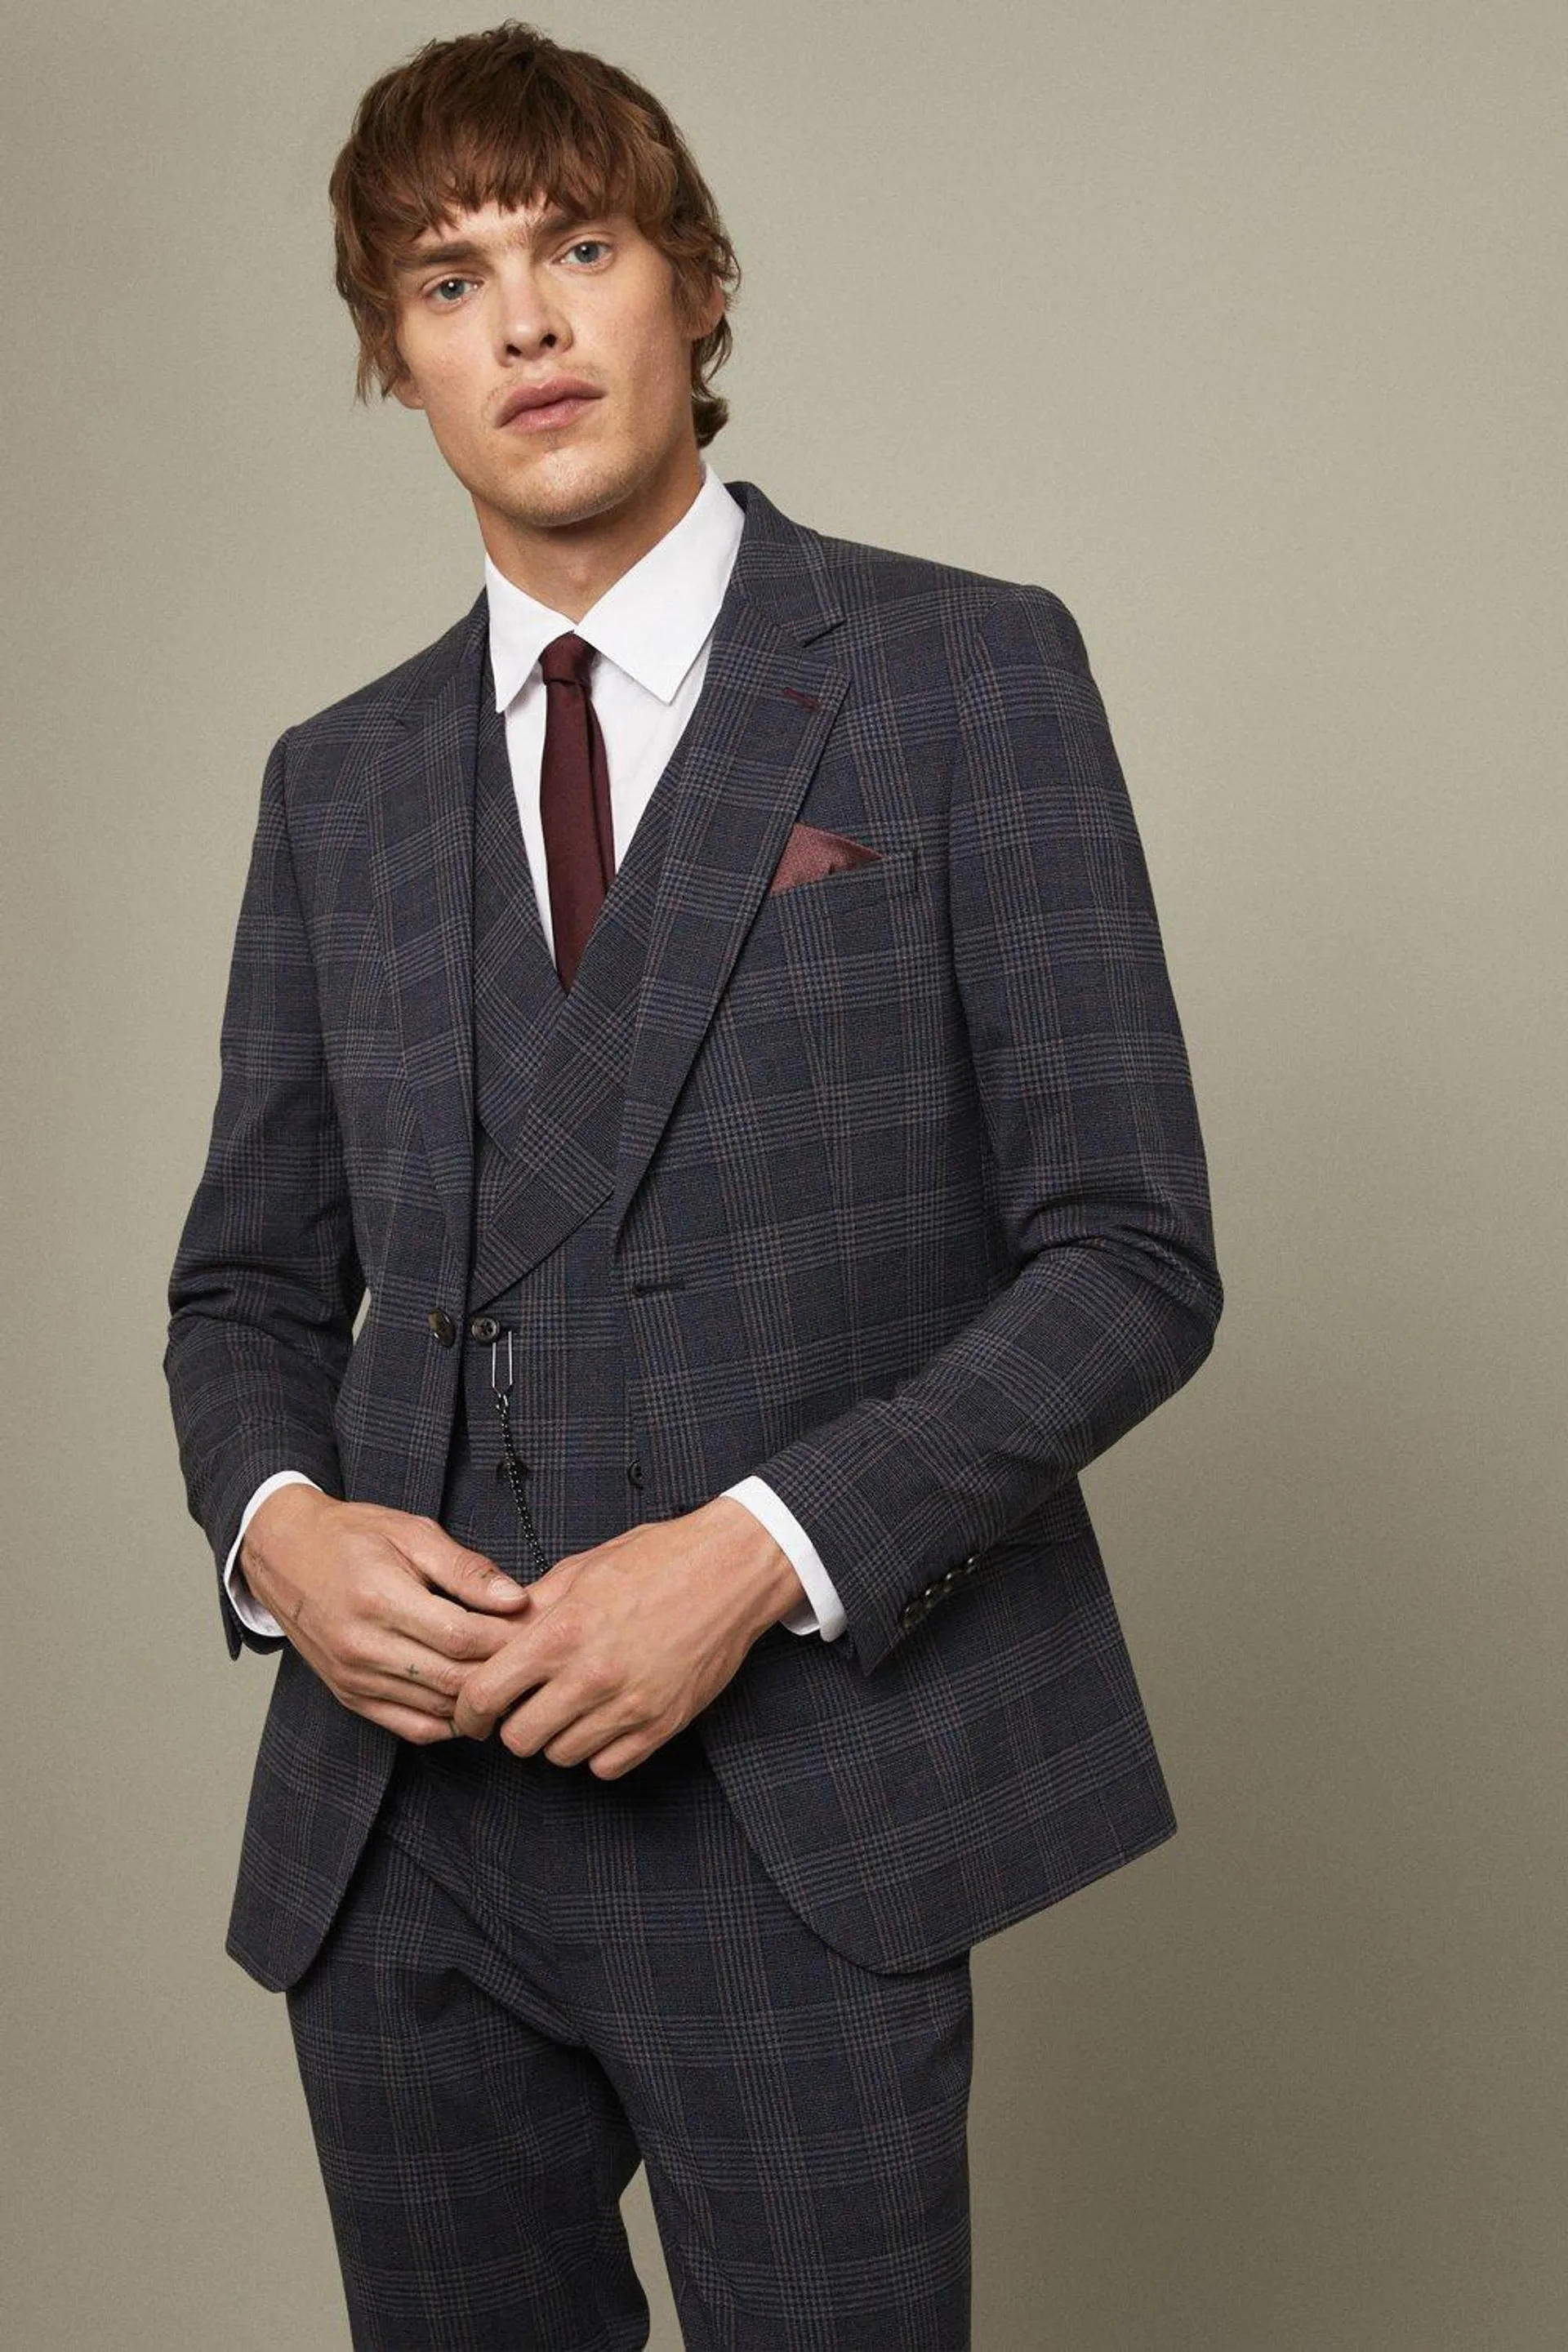 Skinny Fit Grey And Burgundy Retro Check Two-Piece Suit